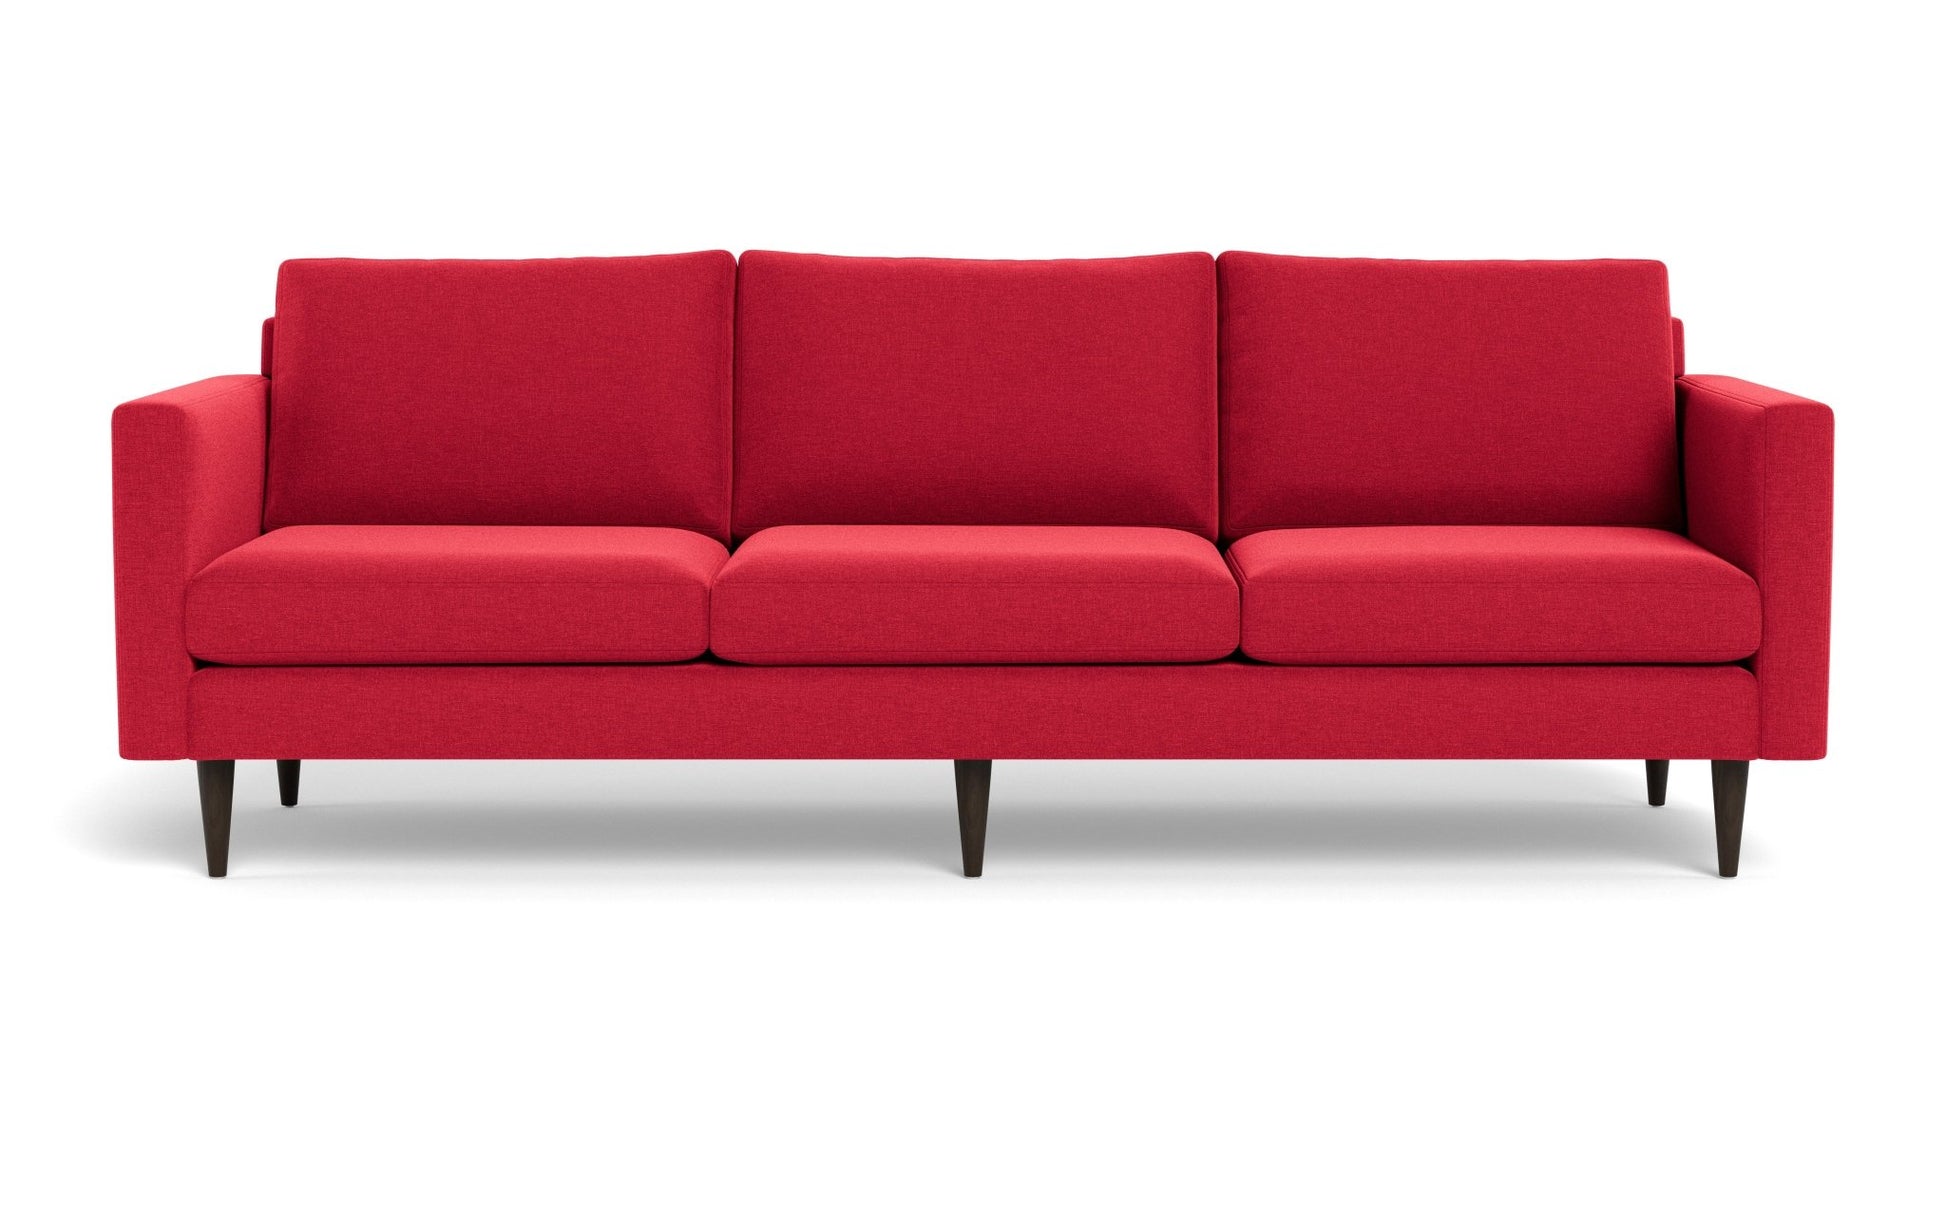 Wallace Untufted Estate Sofa - Bennett Red